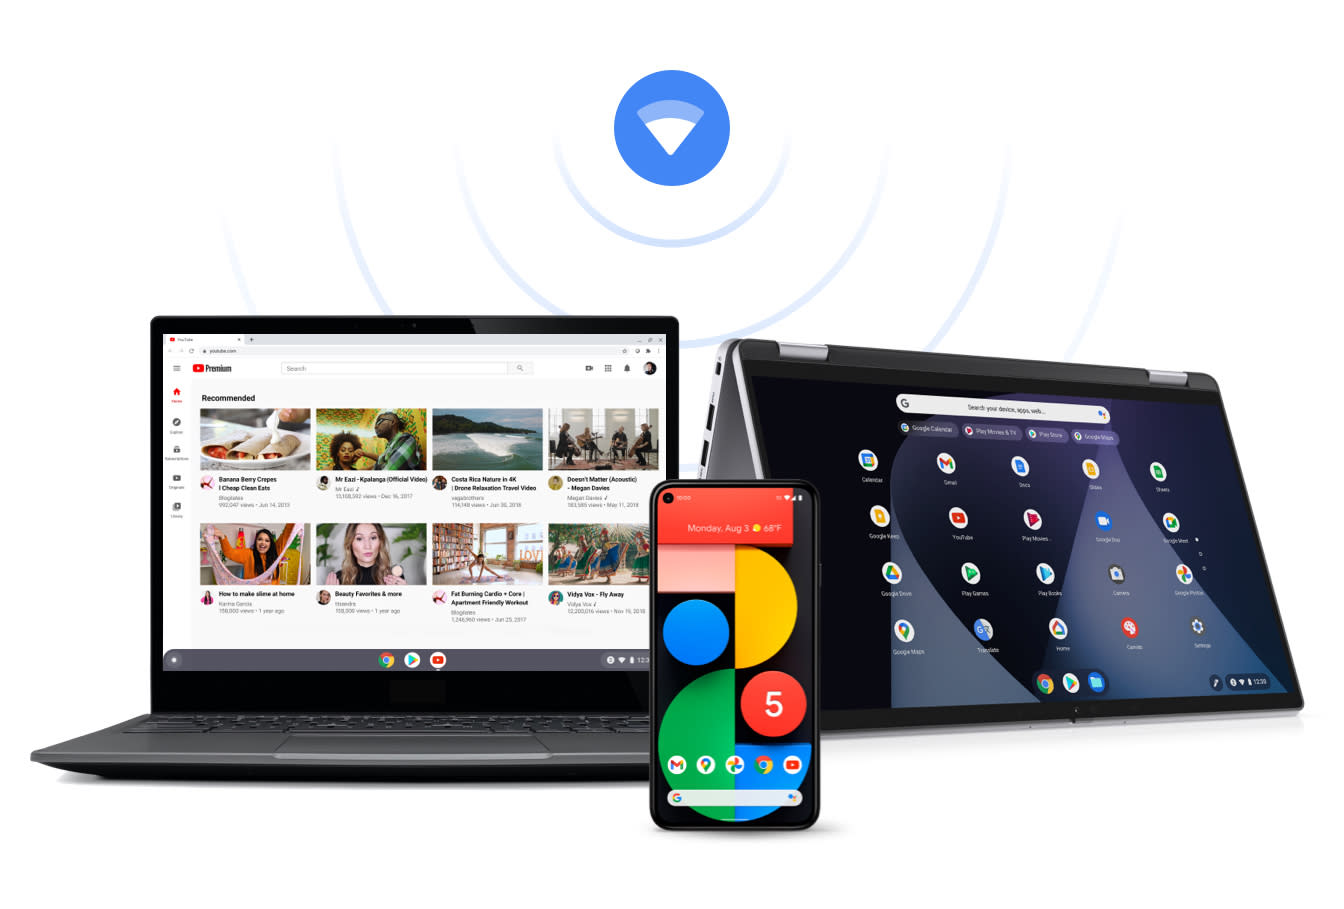 Chrome OS gets a big redesign for its 10th birthday